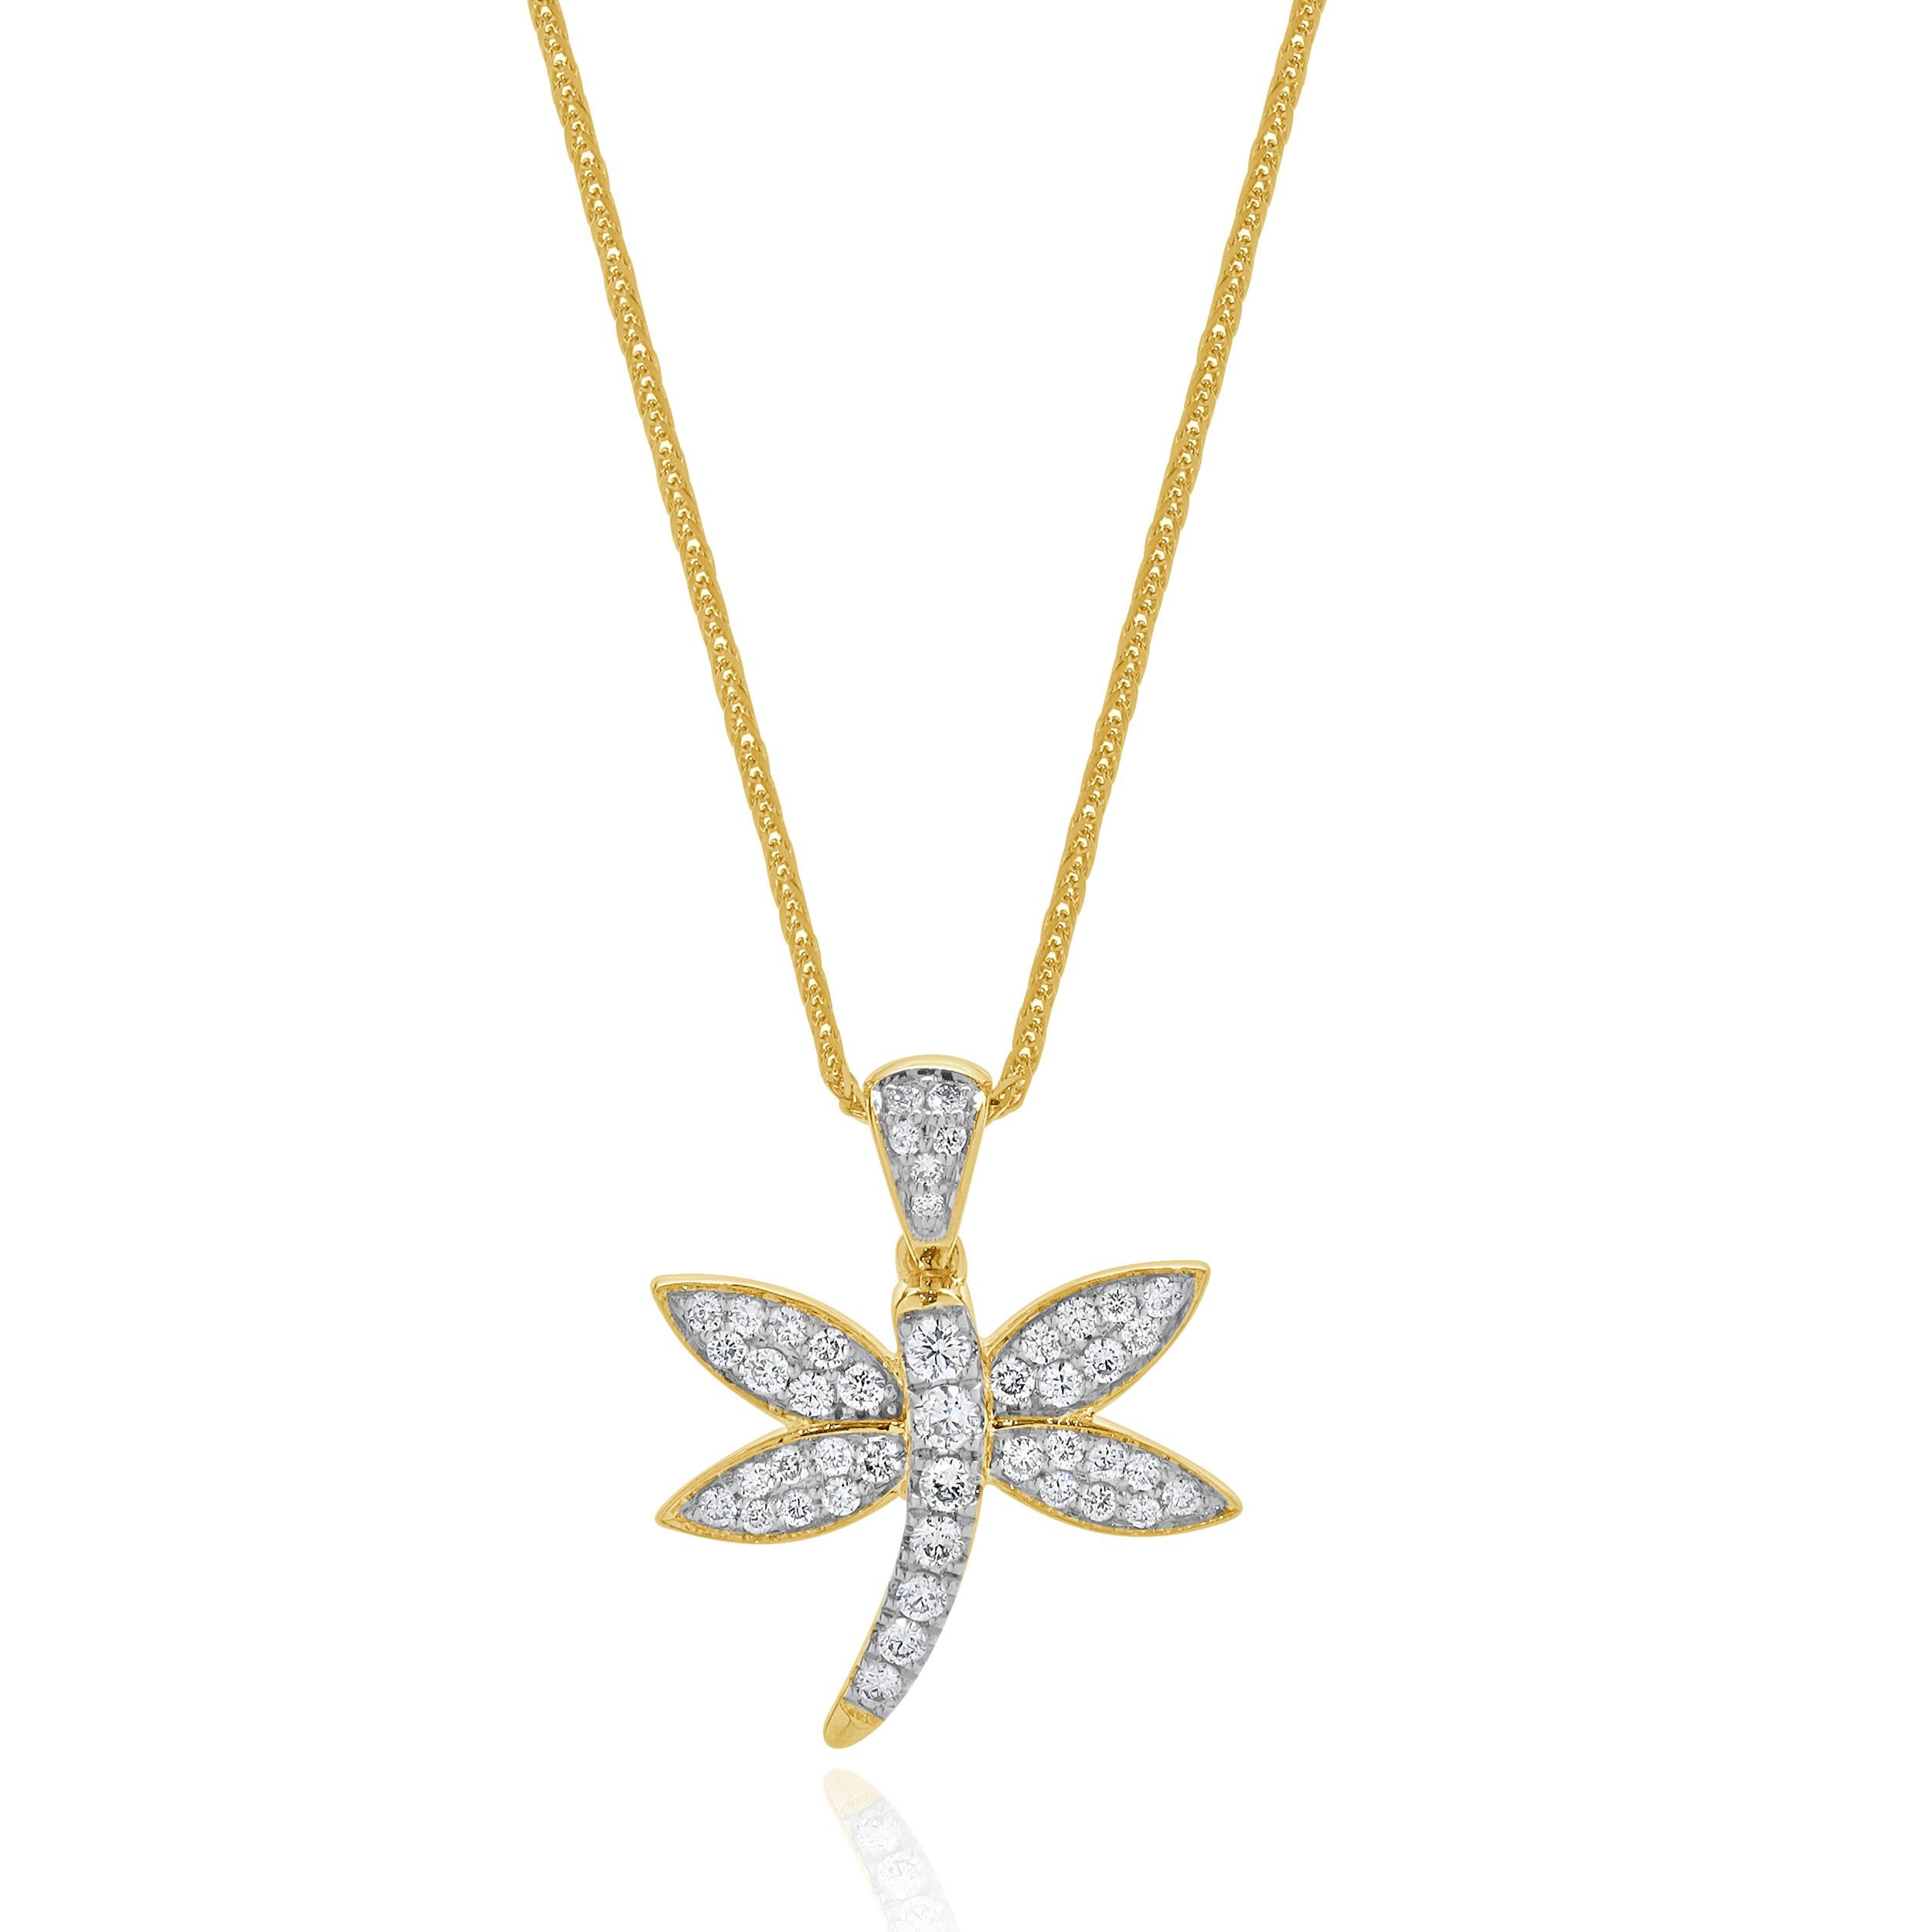 Designer: custom
Material:14K yellow gold
Diamonds: 45 round brilliant cut = 0.32cttw
Color: G 
Clarity: VS2
Dimensions: necklace measures 18-inches in length 
Weight: 3.50 grams
